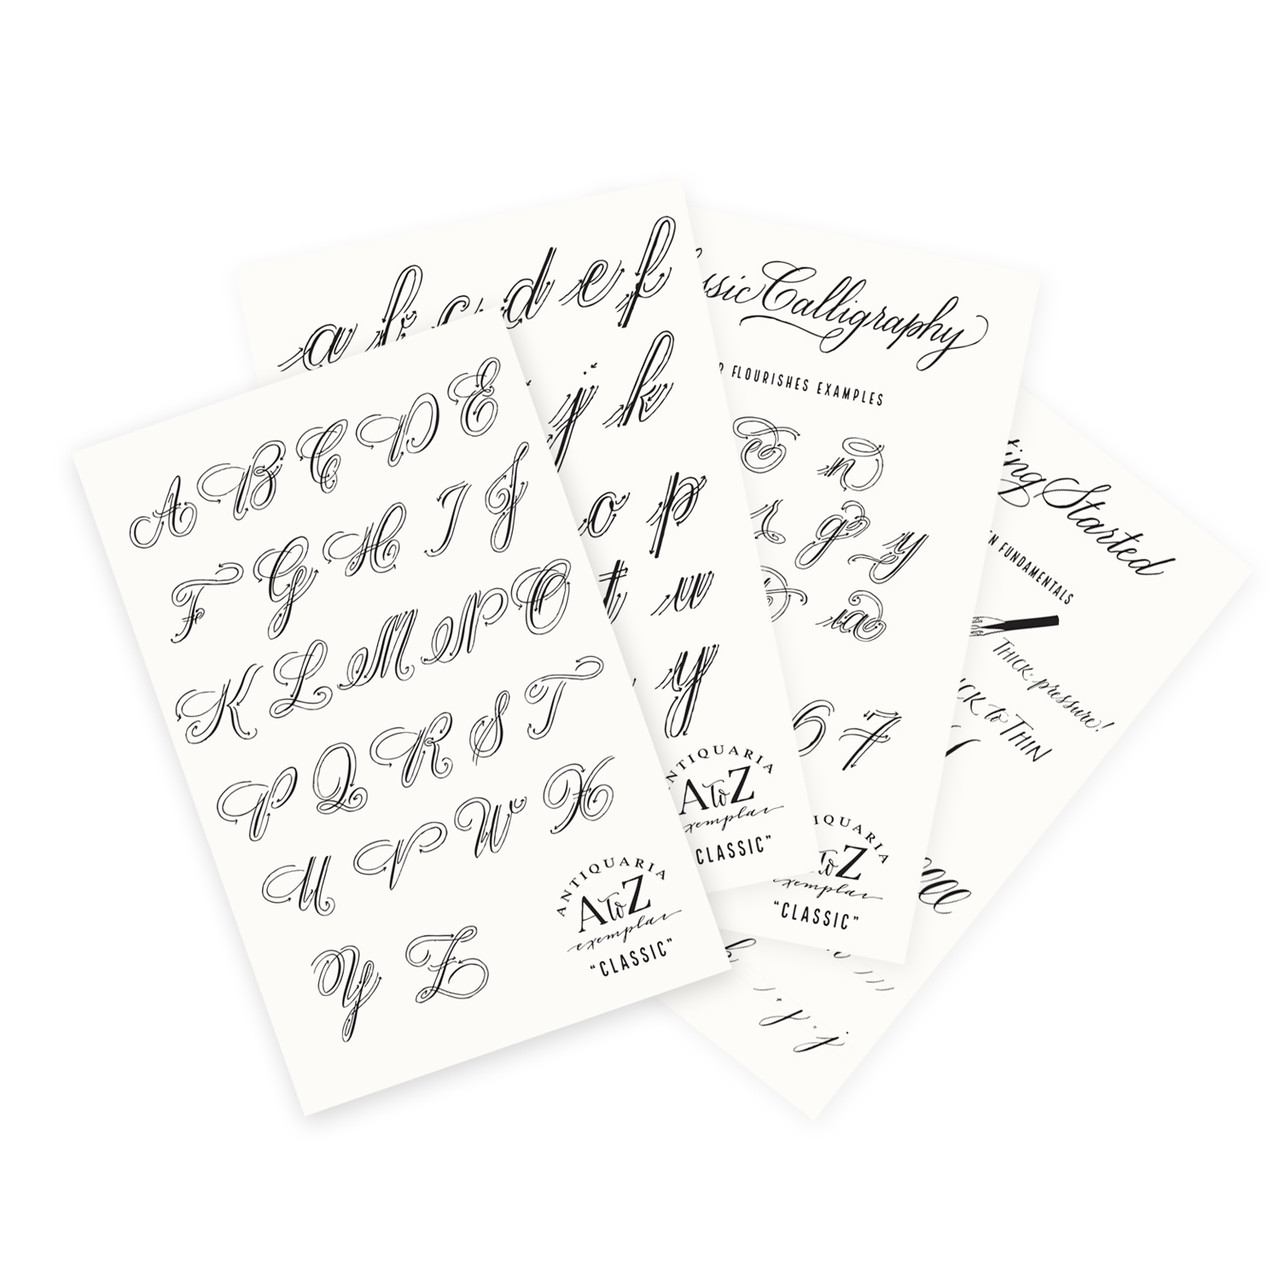 Calligraphy Kit - Optional Add-on for The Ultimate Calligraphy